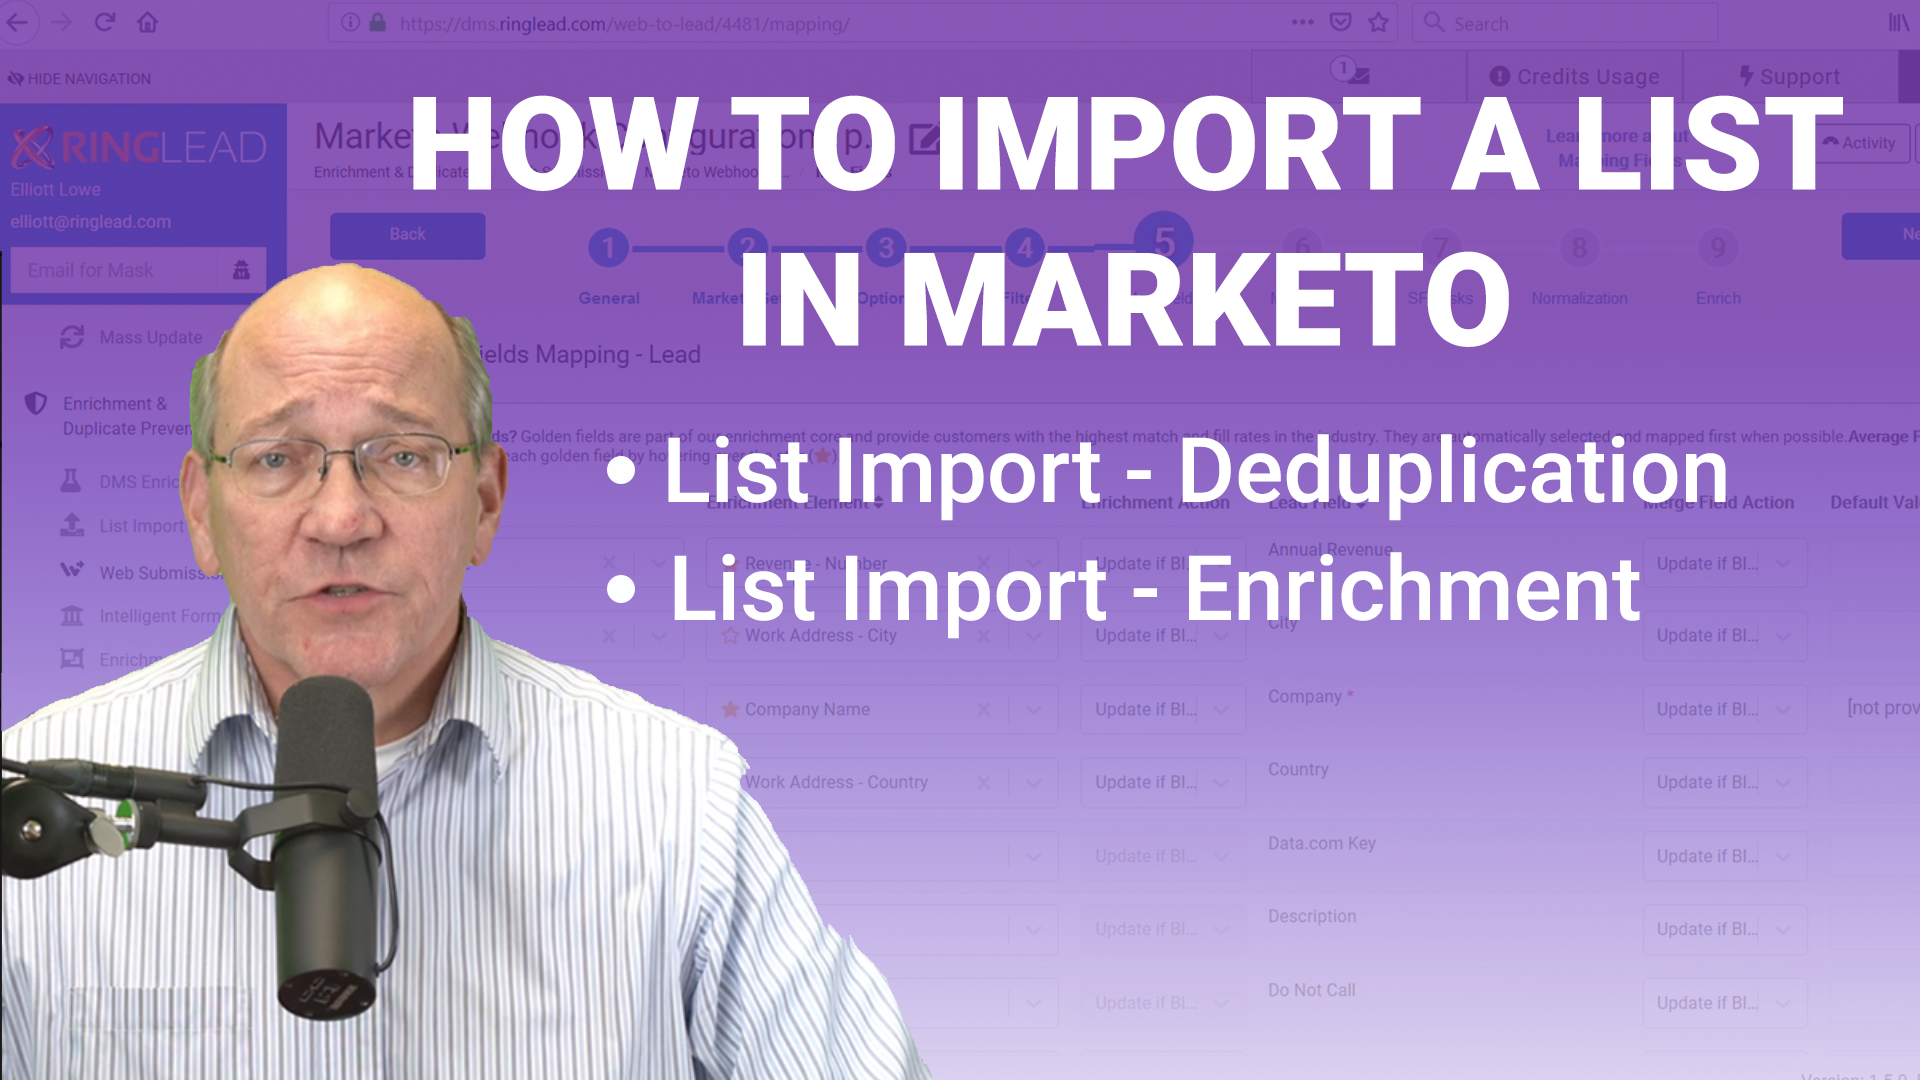 Best Practices for Importing a List to Marketo